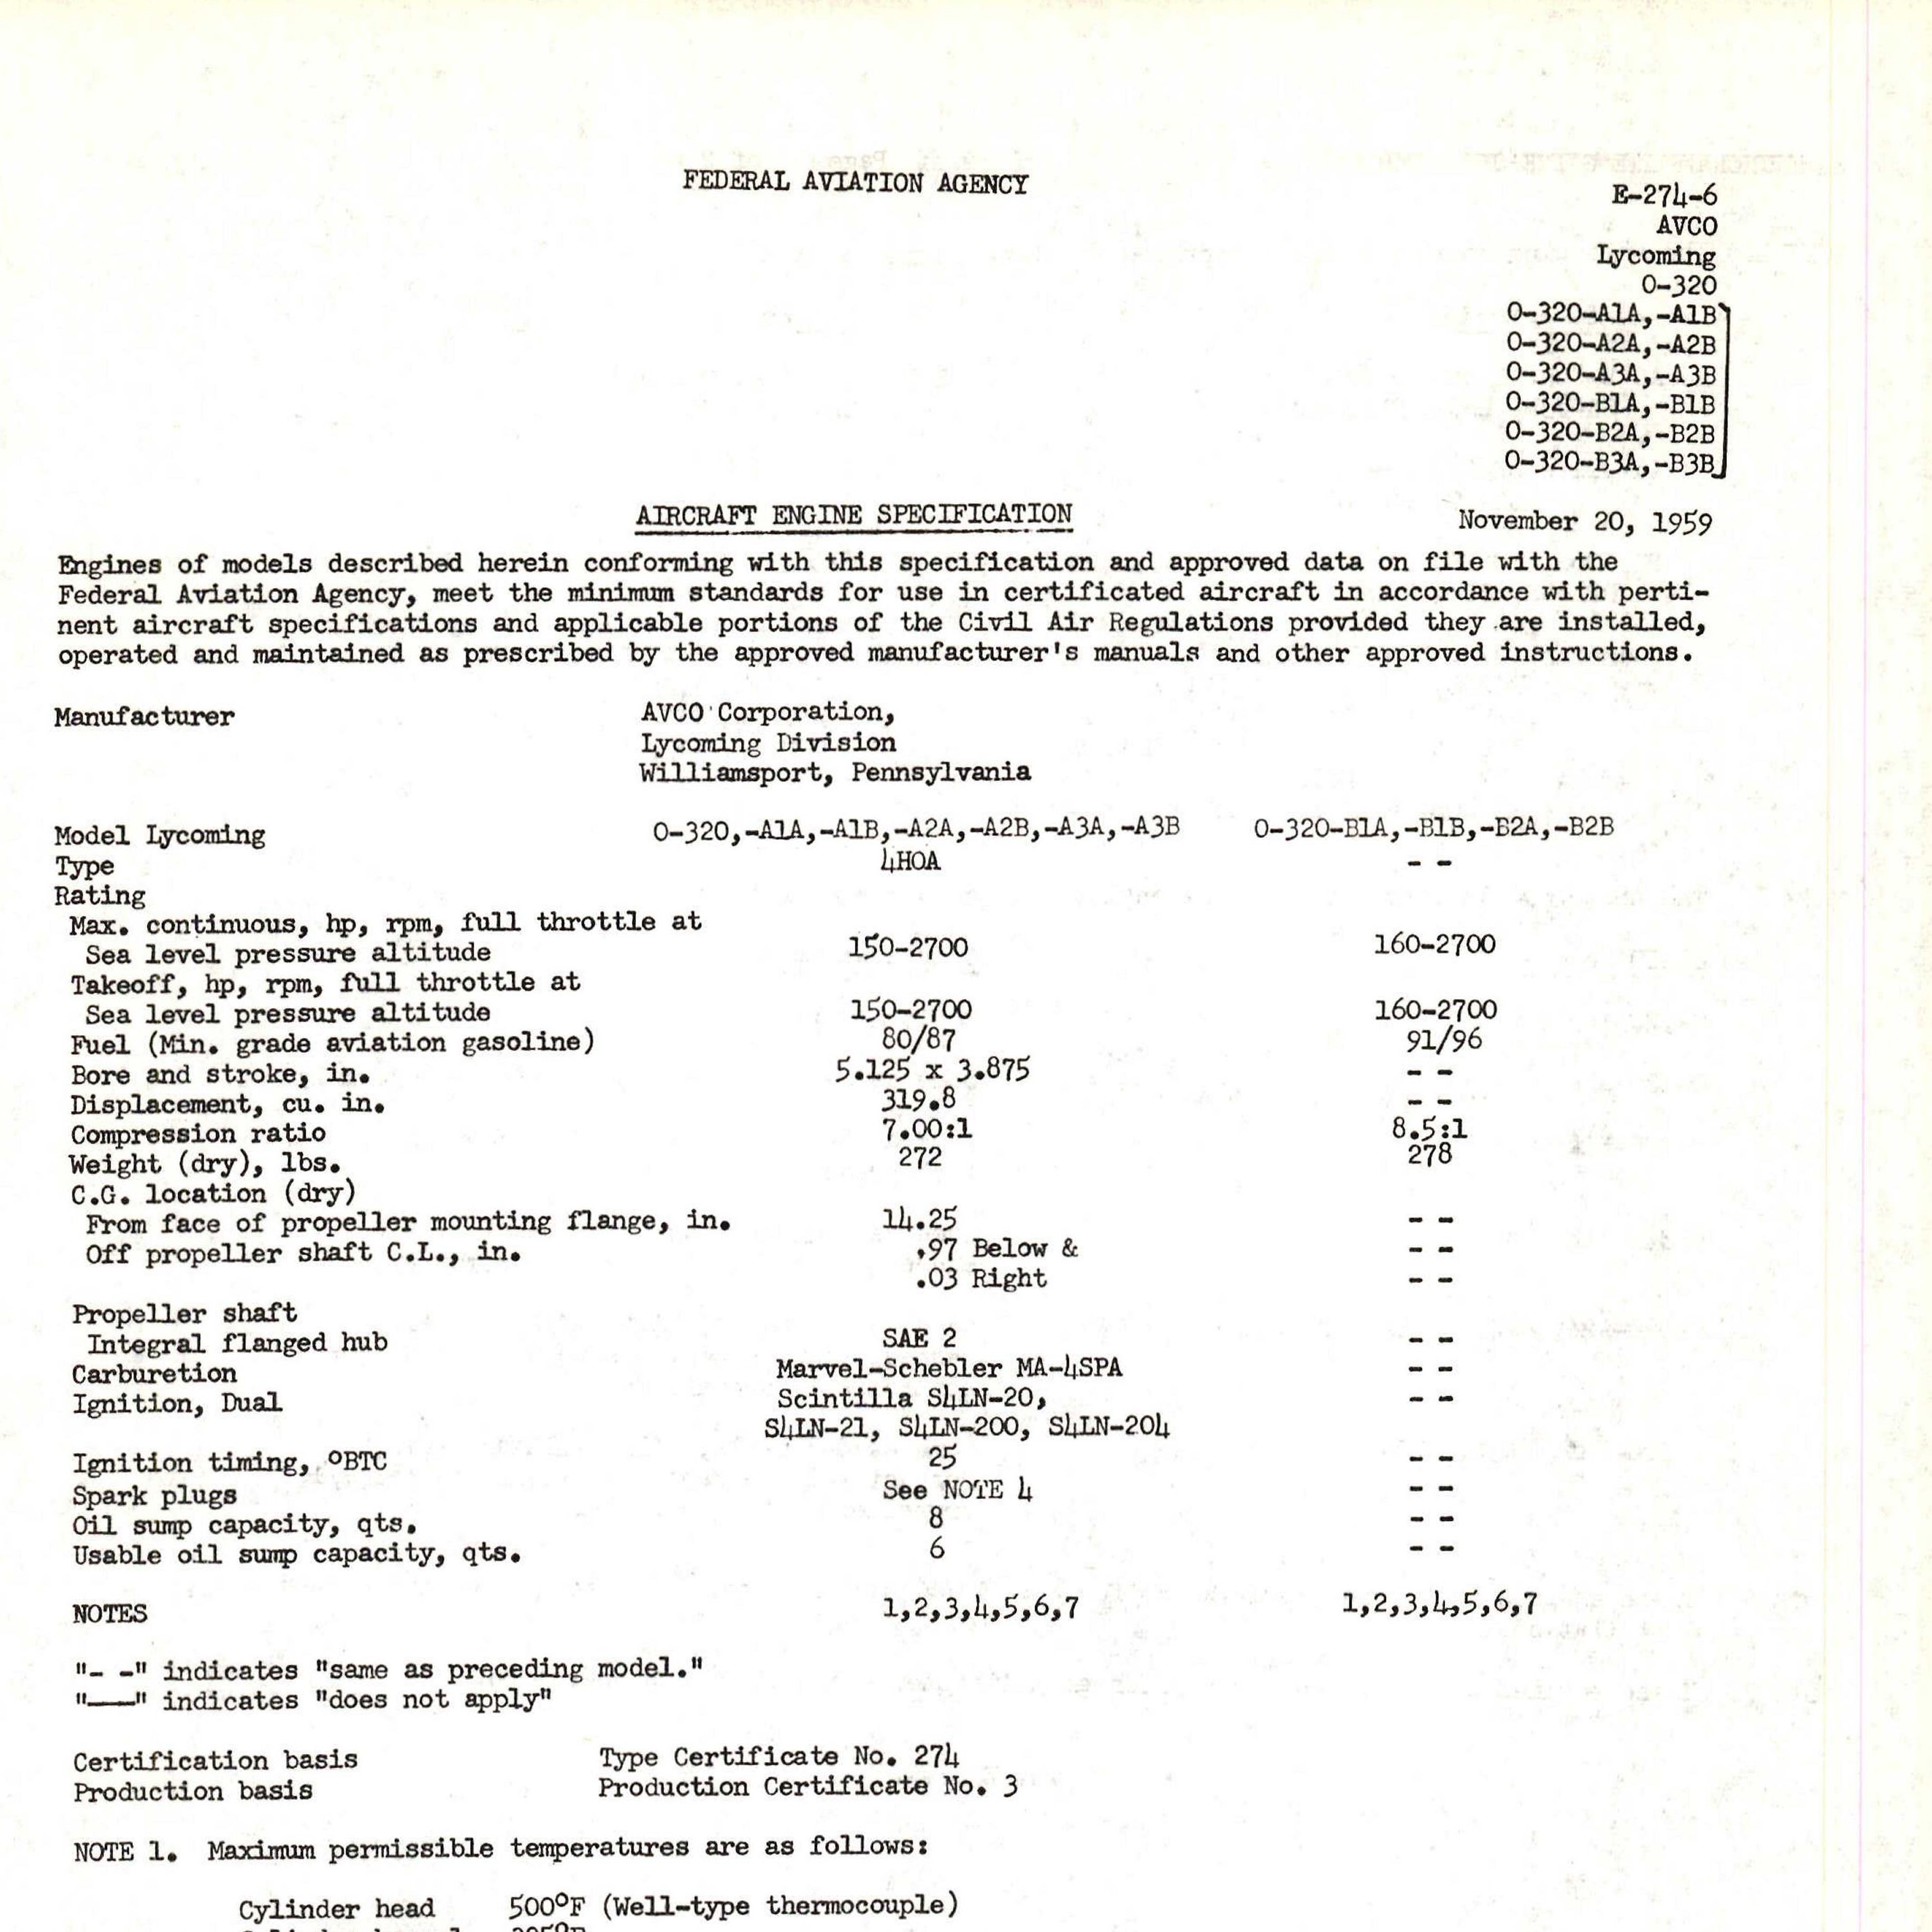 Lycoming Engine Specifications